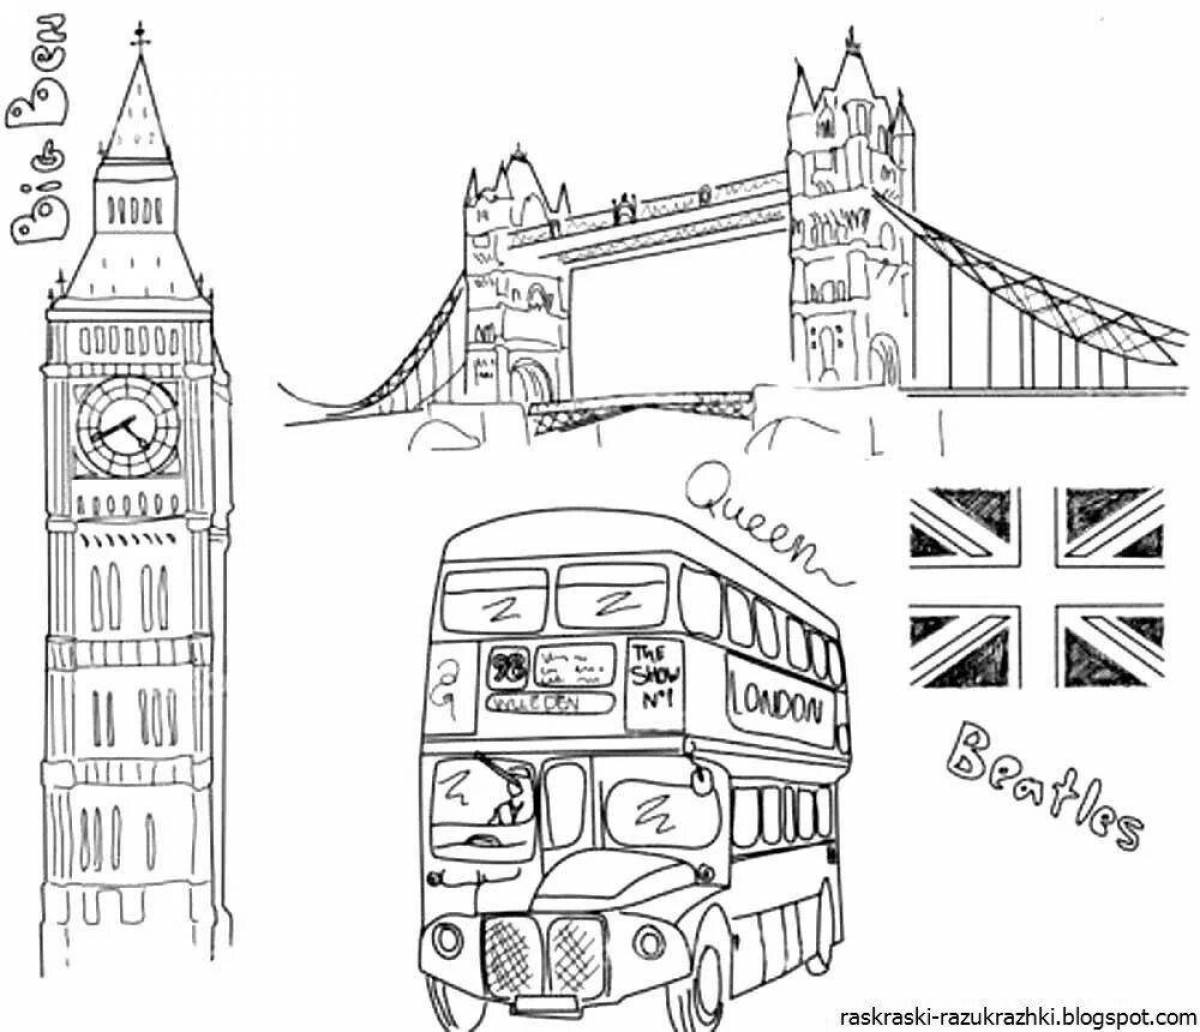 Fabulous coloring pages of the world for children